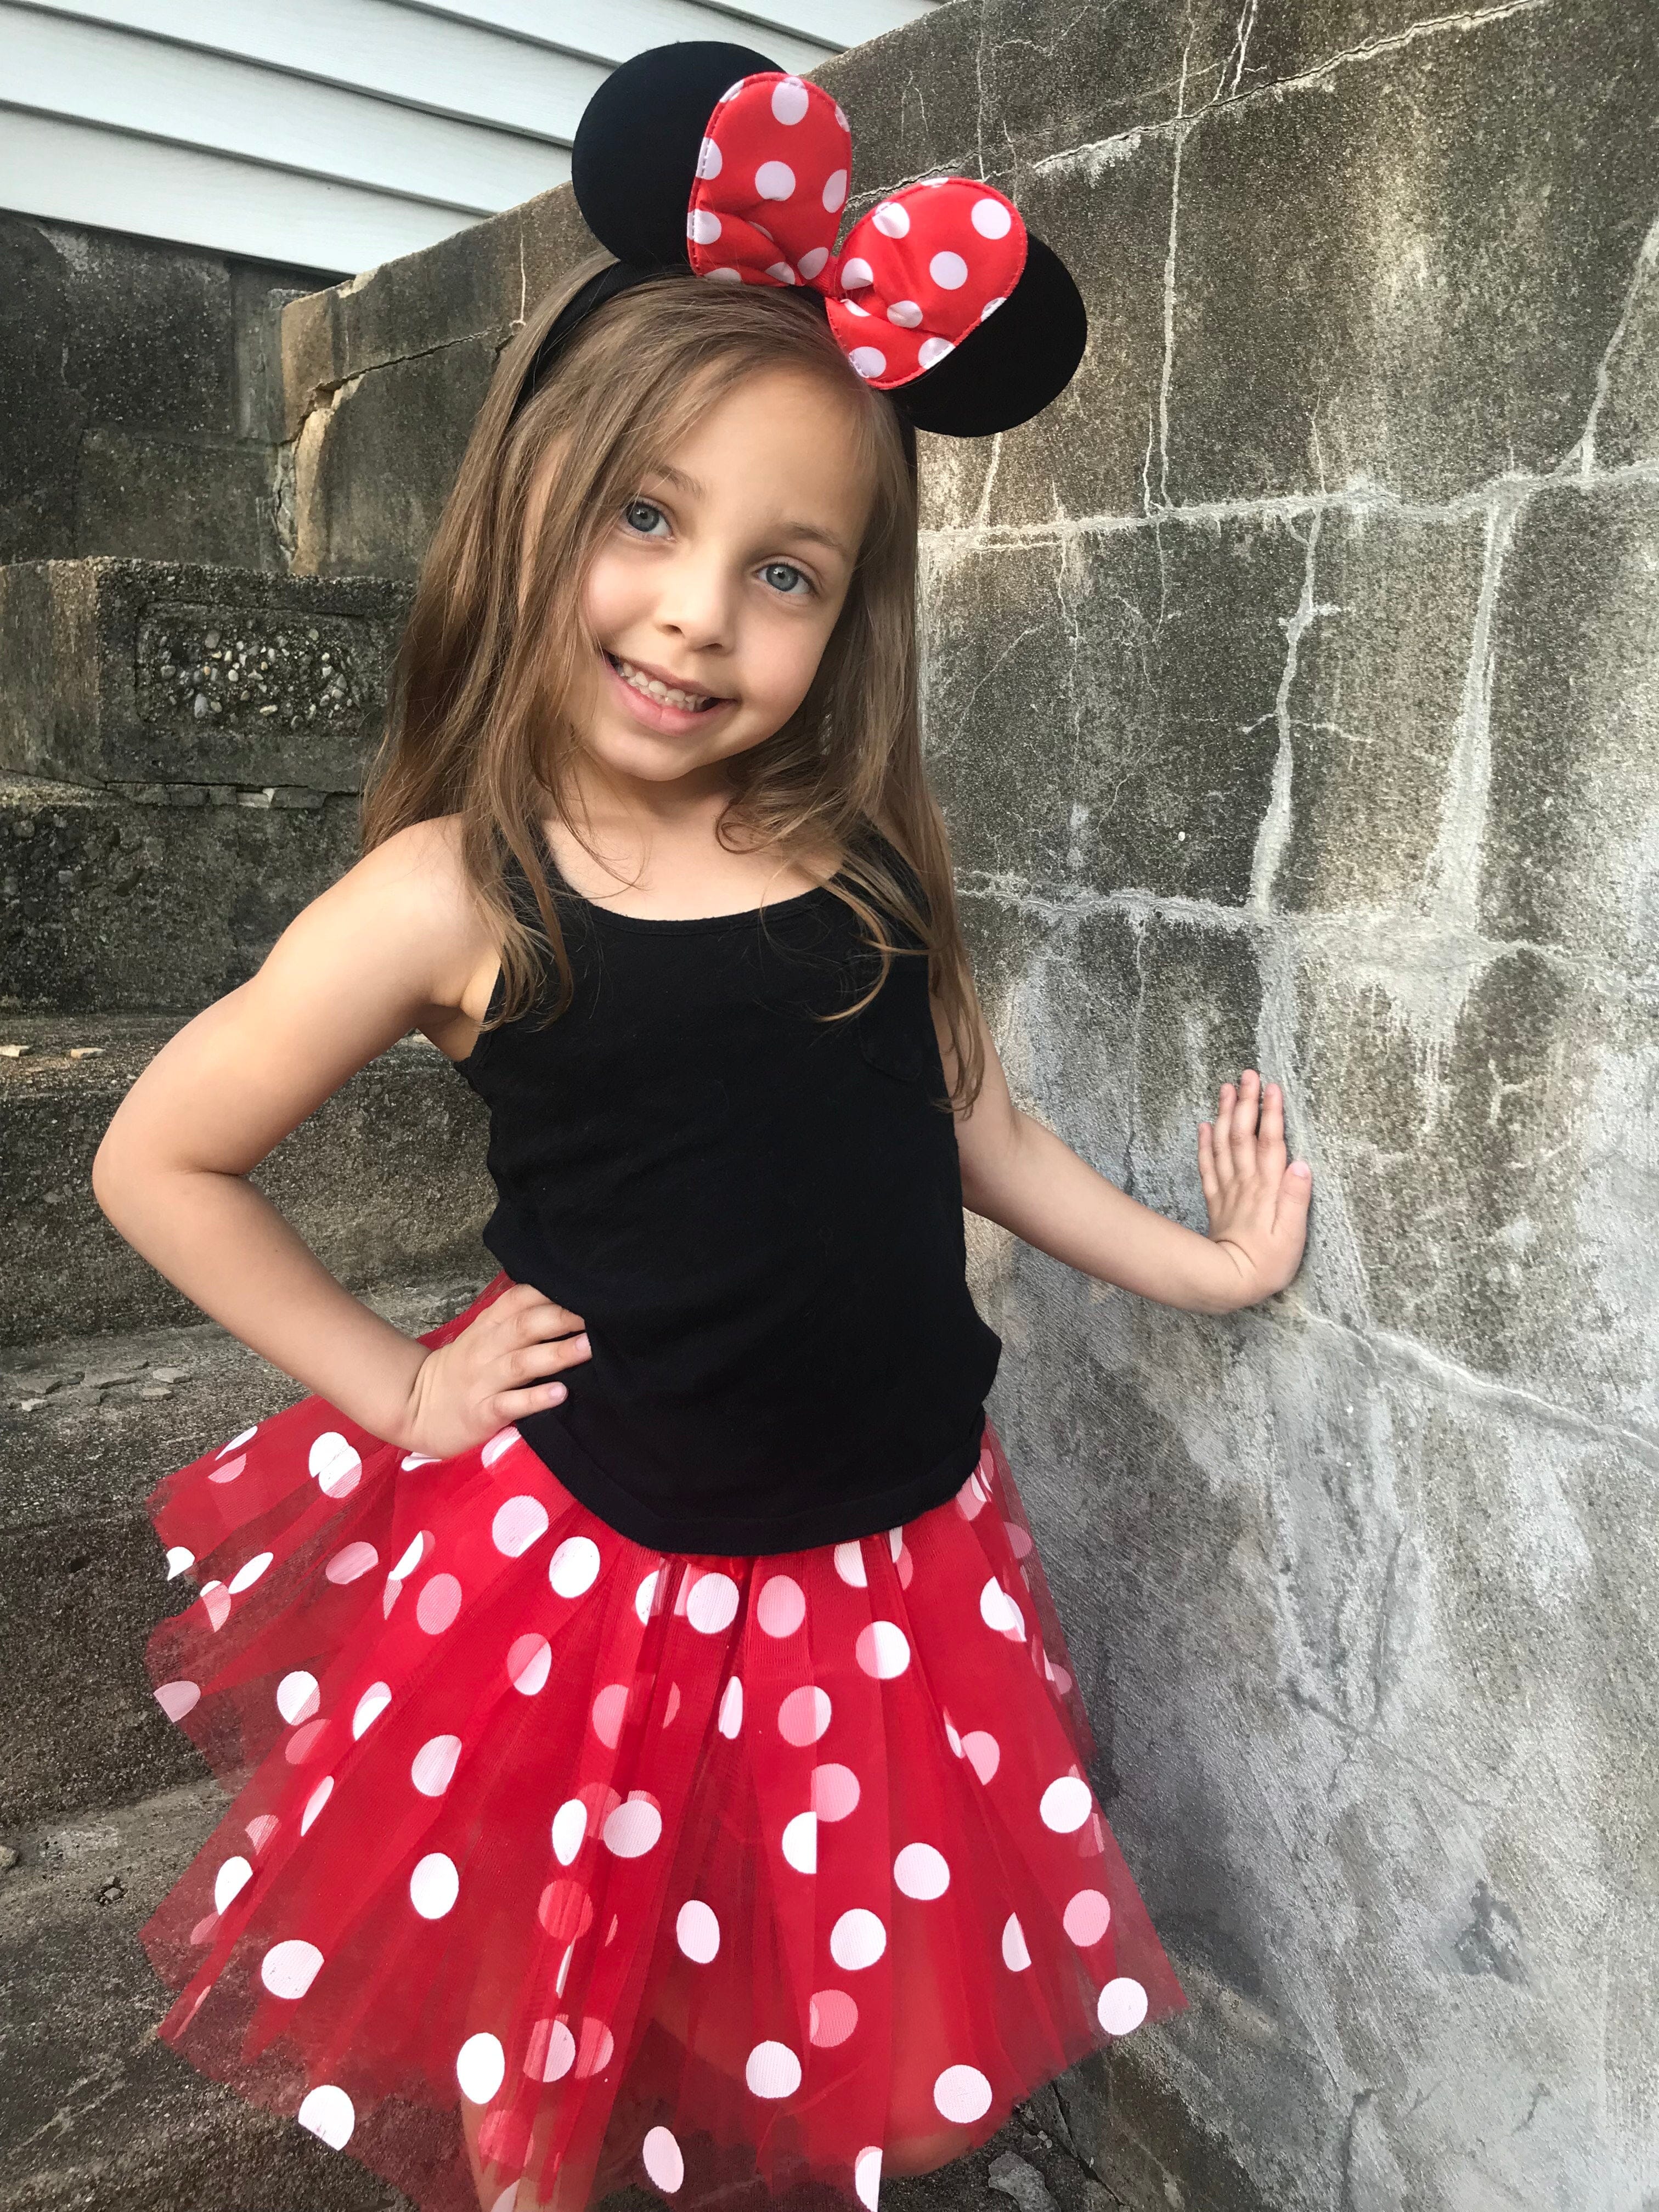 minnie mouse in red